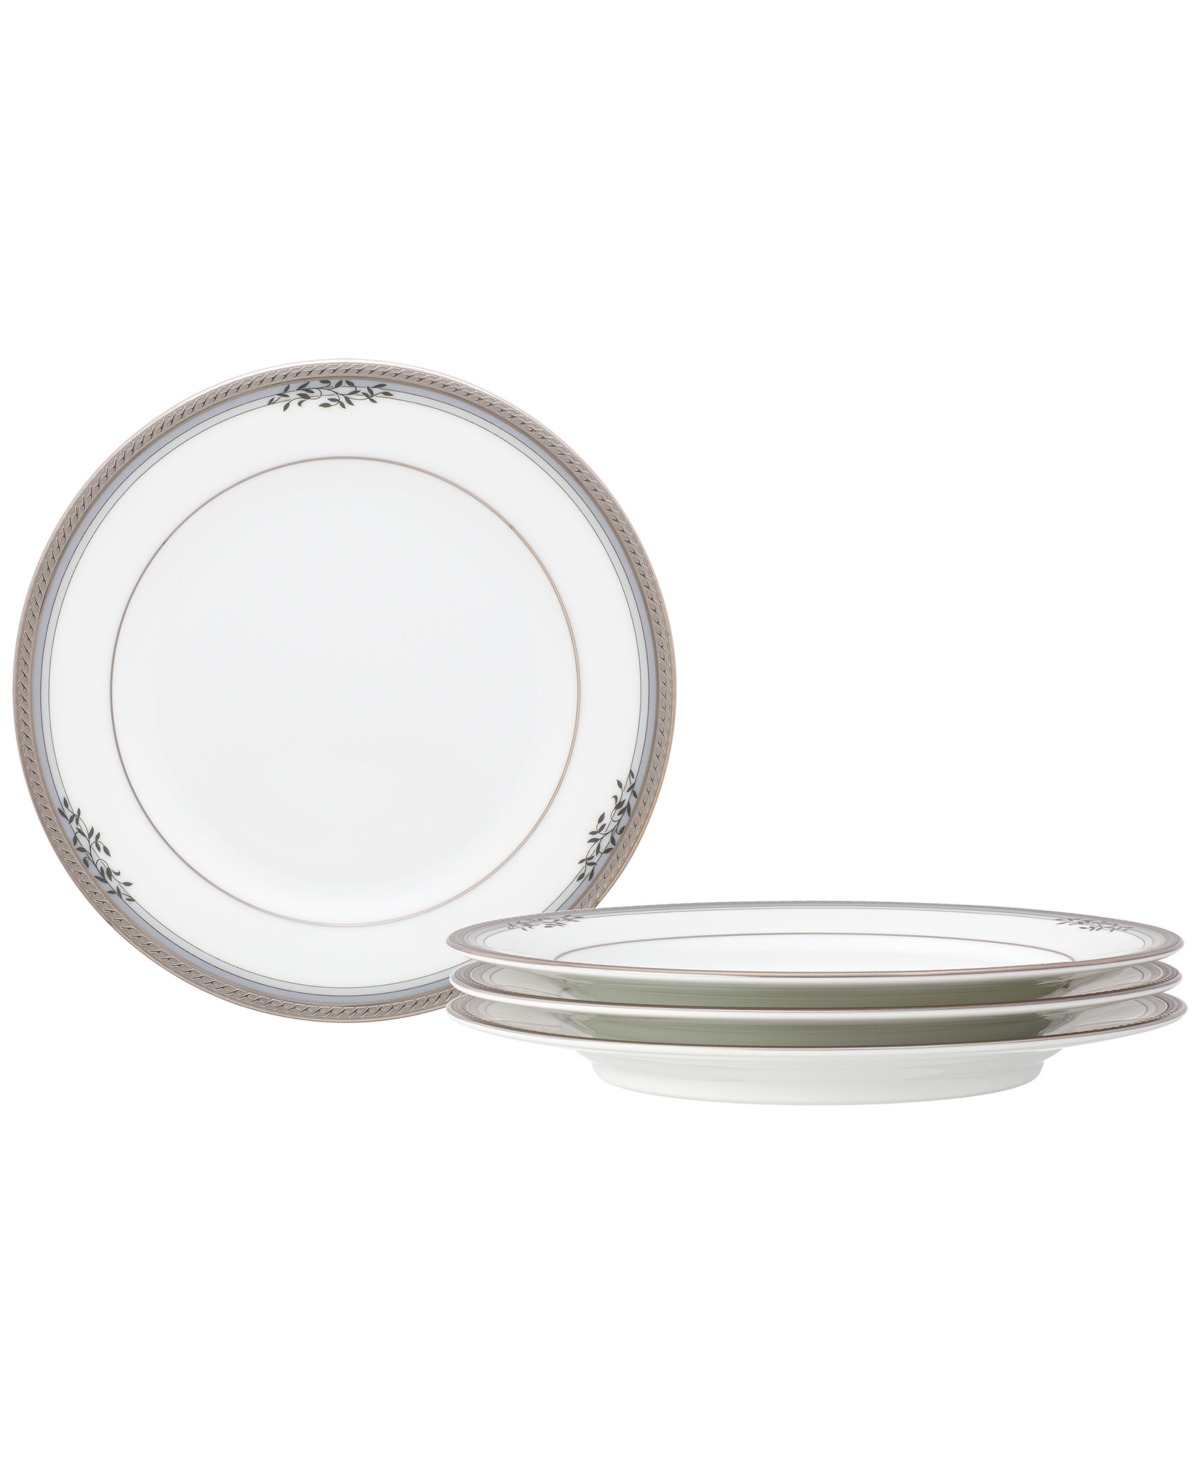 Noritake Laurelvale 4 Piece Bread Butter Or Appetizer Plates Butter Or Appetizer Plate Set, Service For 4 In White